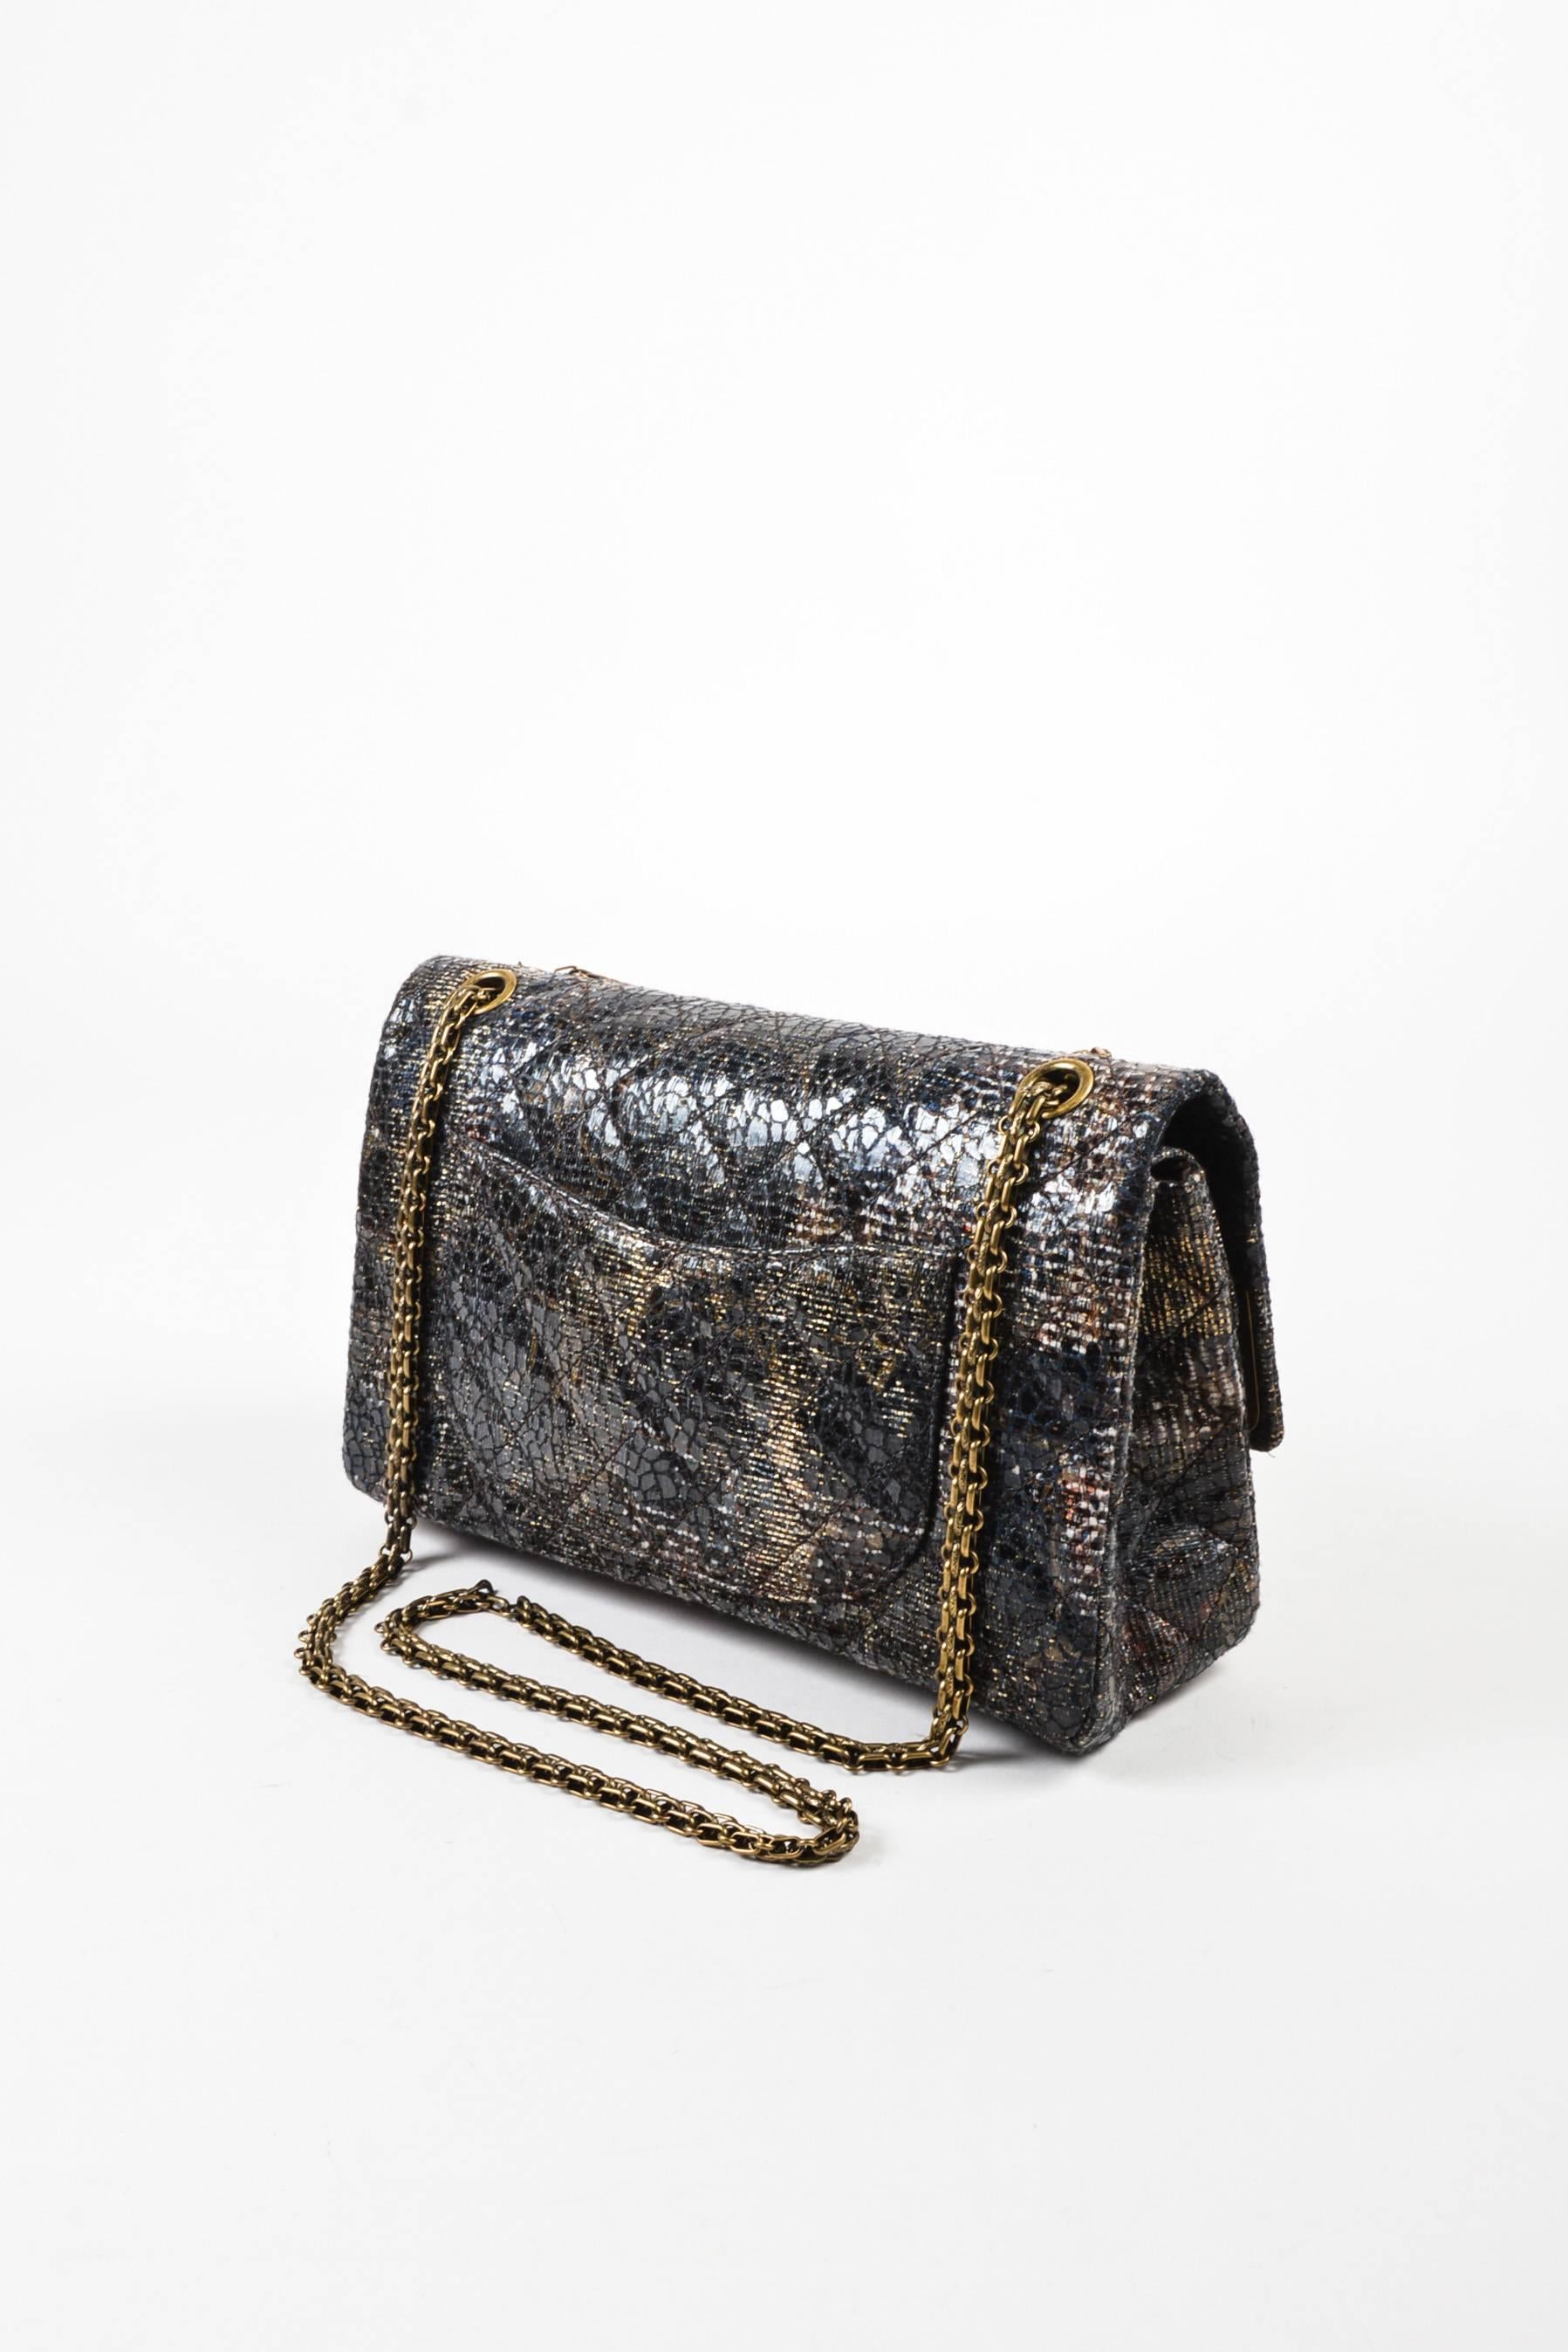 Special edition gray and brown lacquered tweed bag from Chanel's Paris-Shanghai Runway Collection circa 2009-2010. Gold chain strap that cab be doubled or worn as a single crossbody strap. Open pocket on back of bag. Mademoiselle turn lock on front